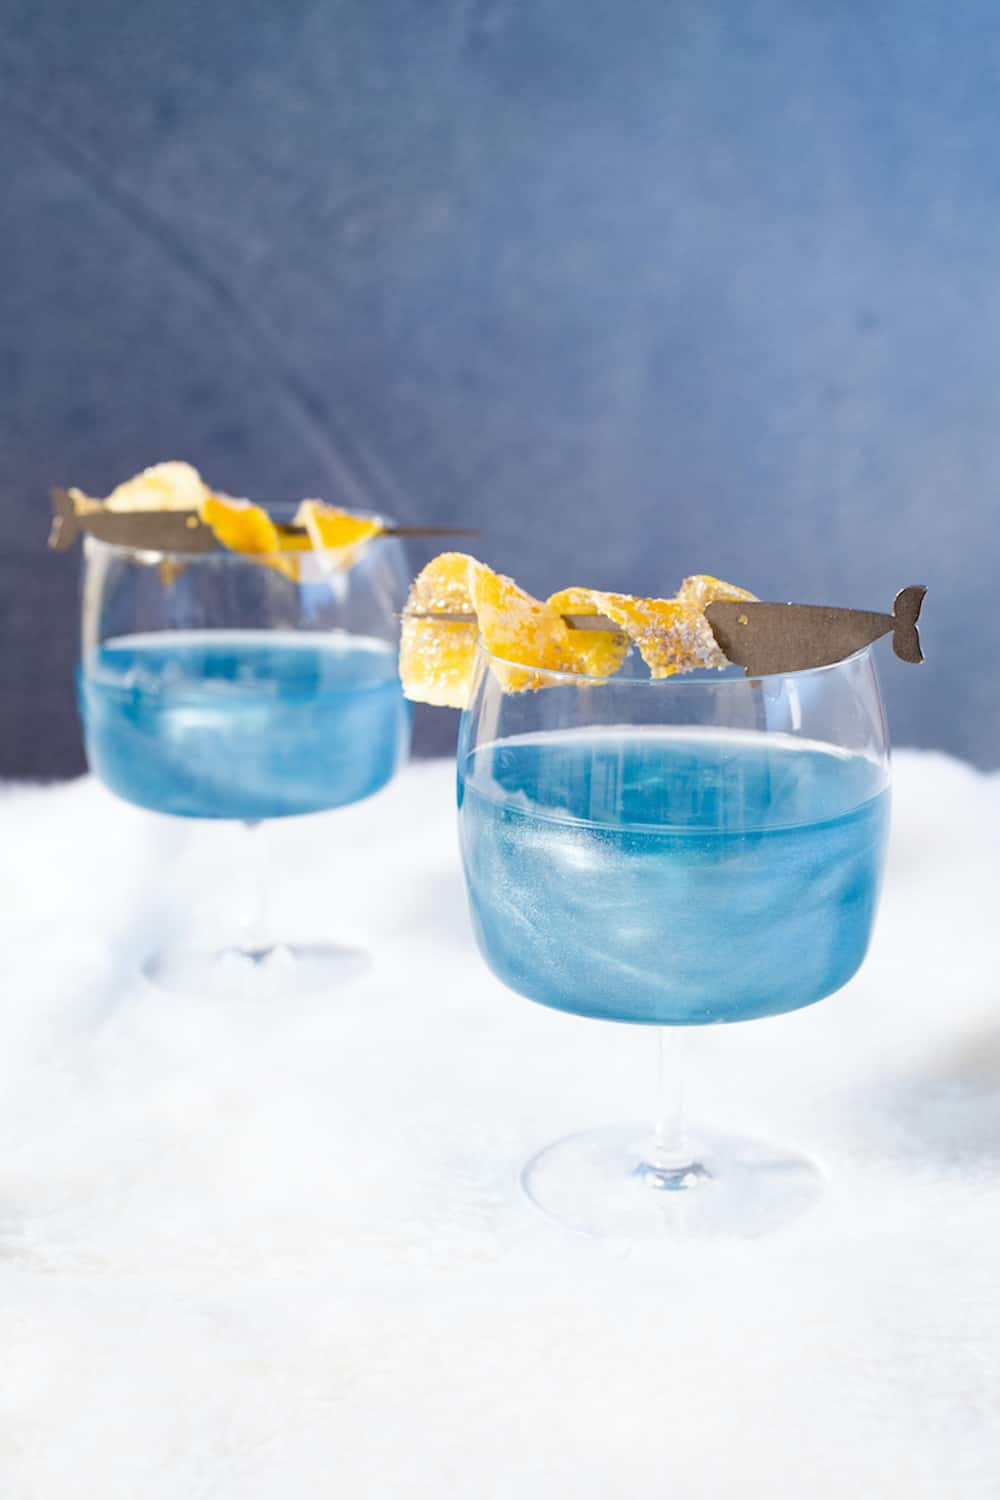 The Narwhal Cocktail: A Magical Shimmering Milk Punch